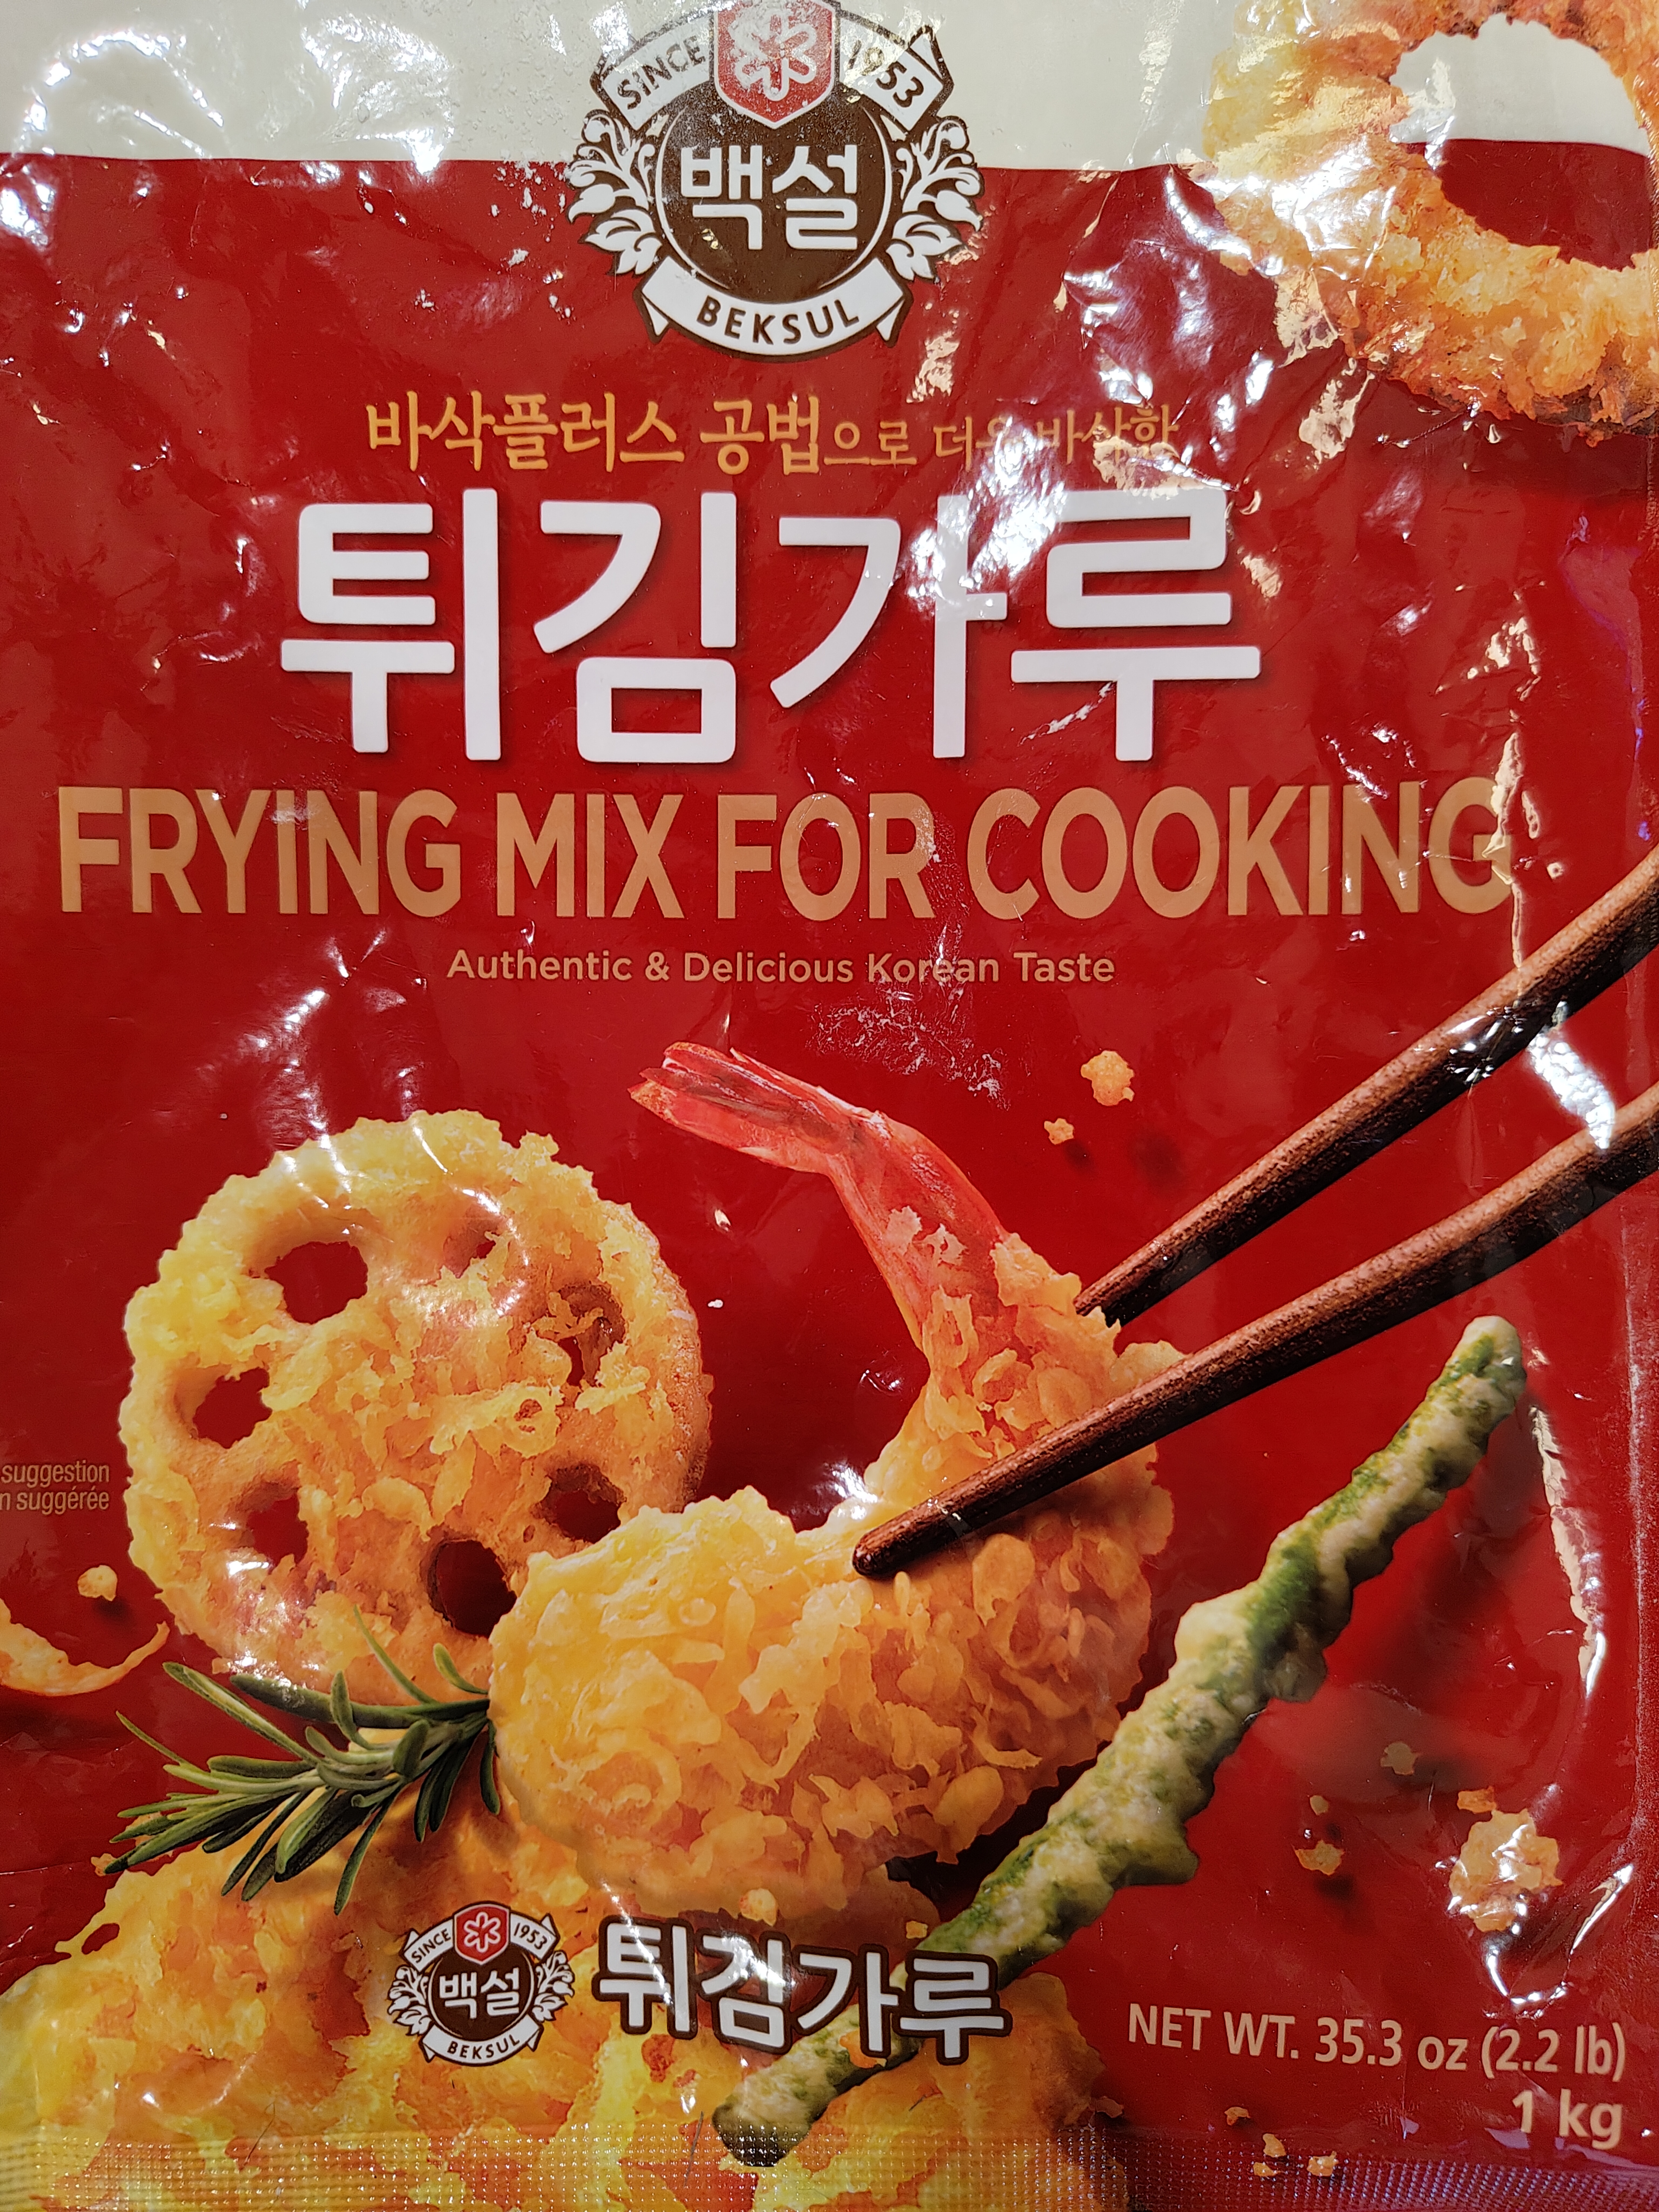 Option 1 - Frying Mix For Cooking